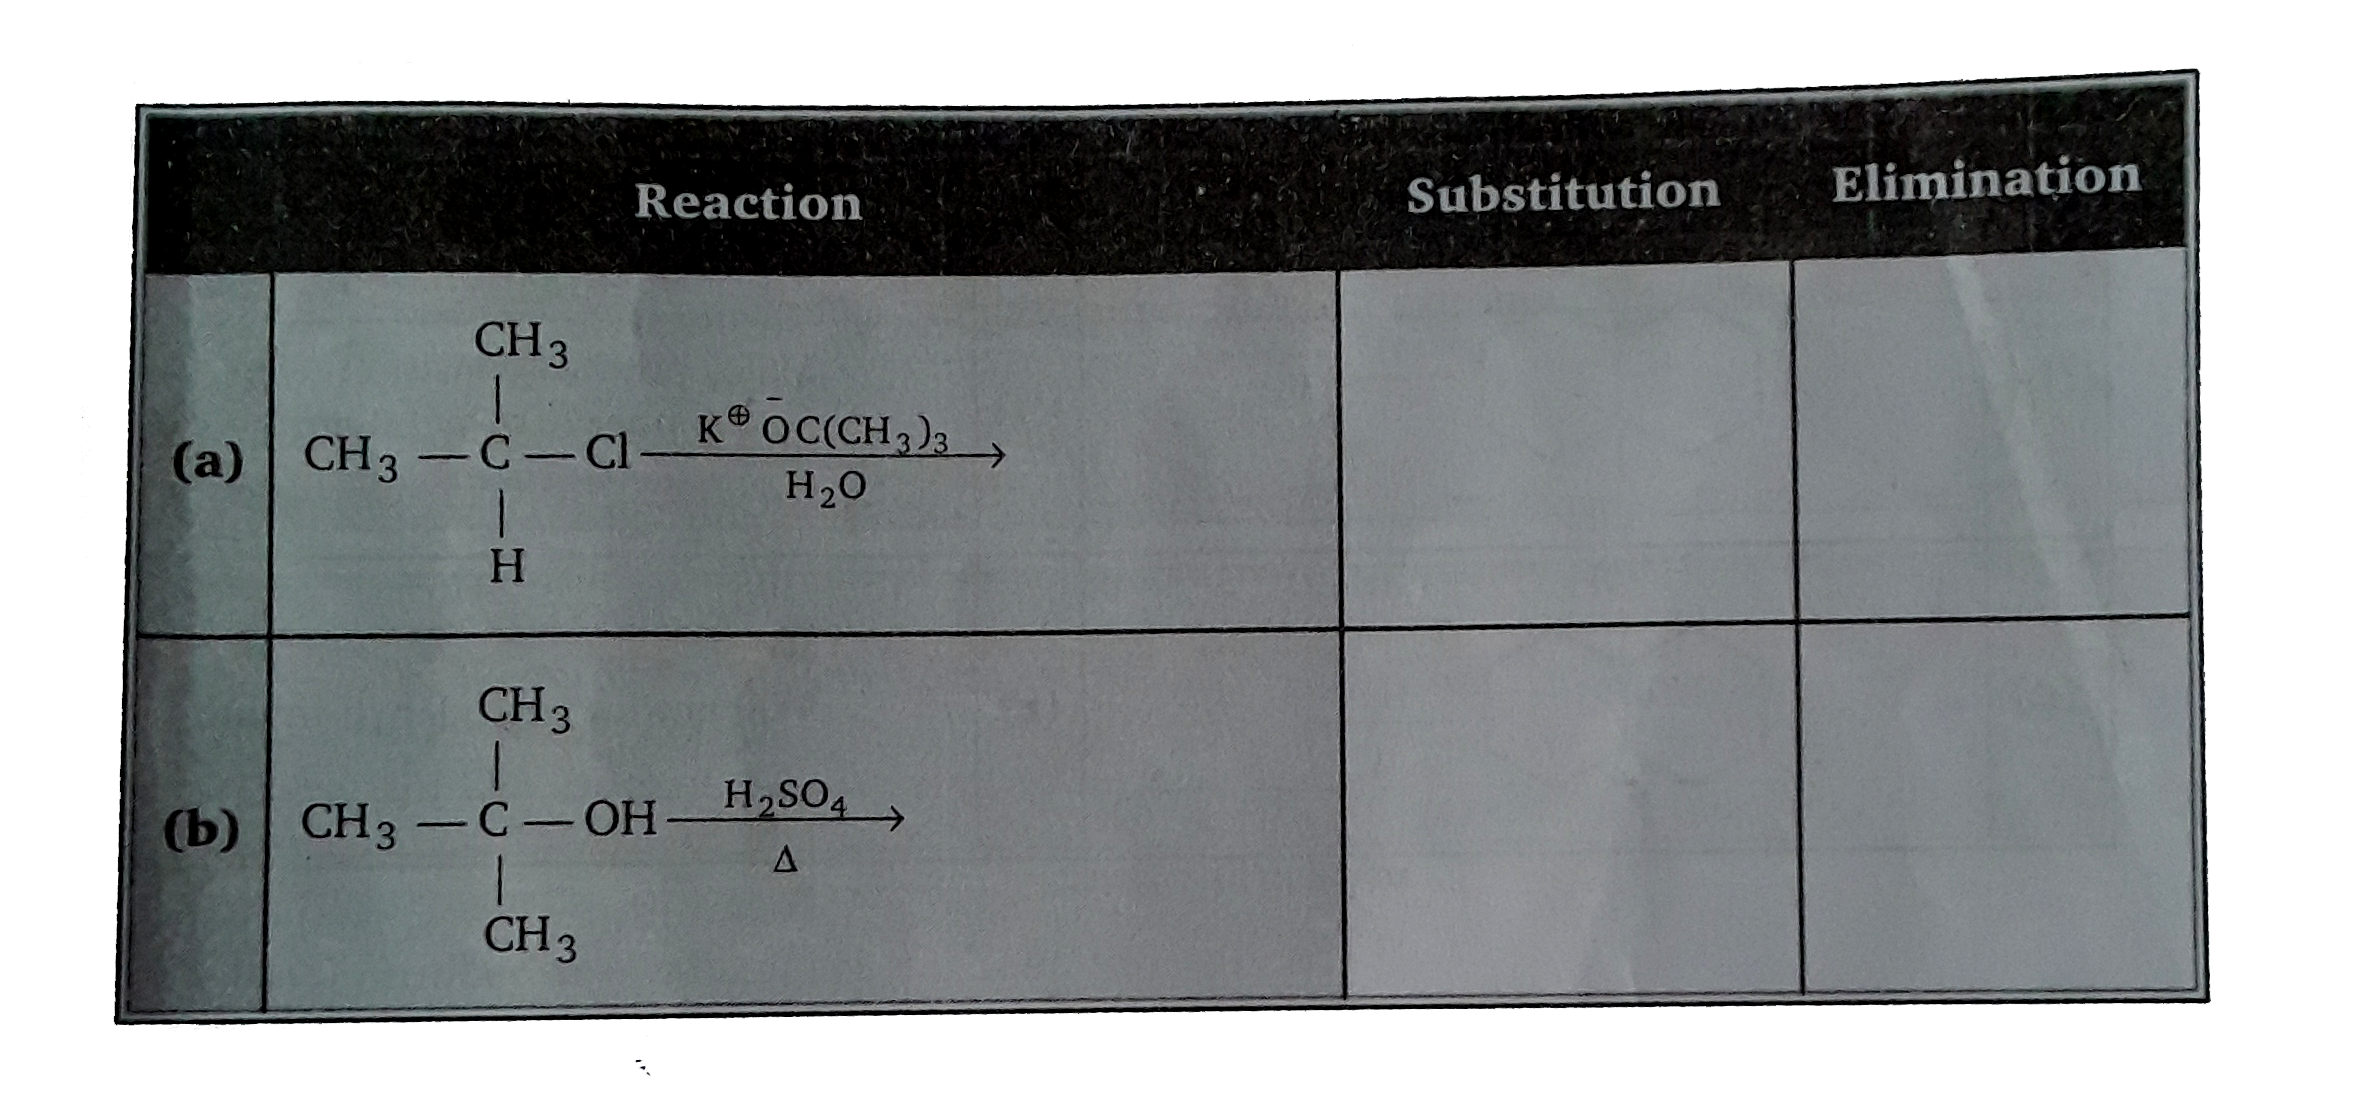 Select whether the following reagent combination will result in eliminataion is substition reaction s leasding to the major product.